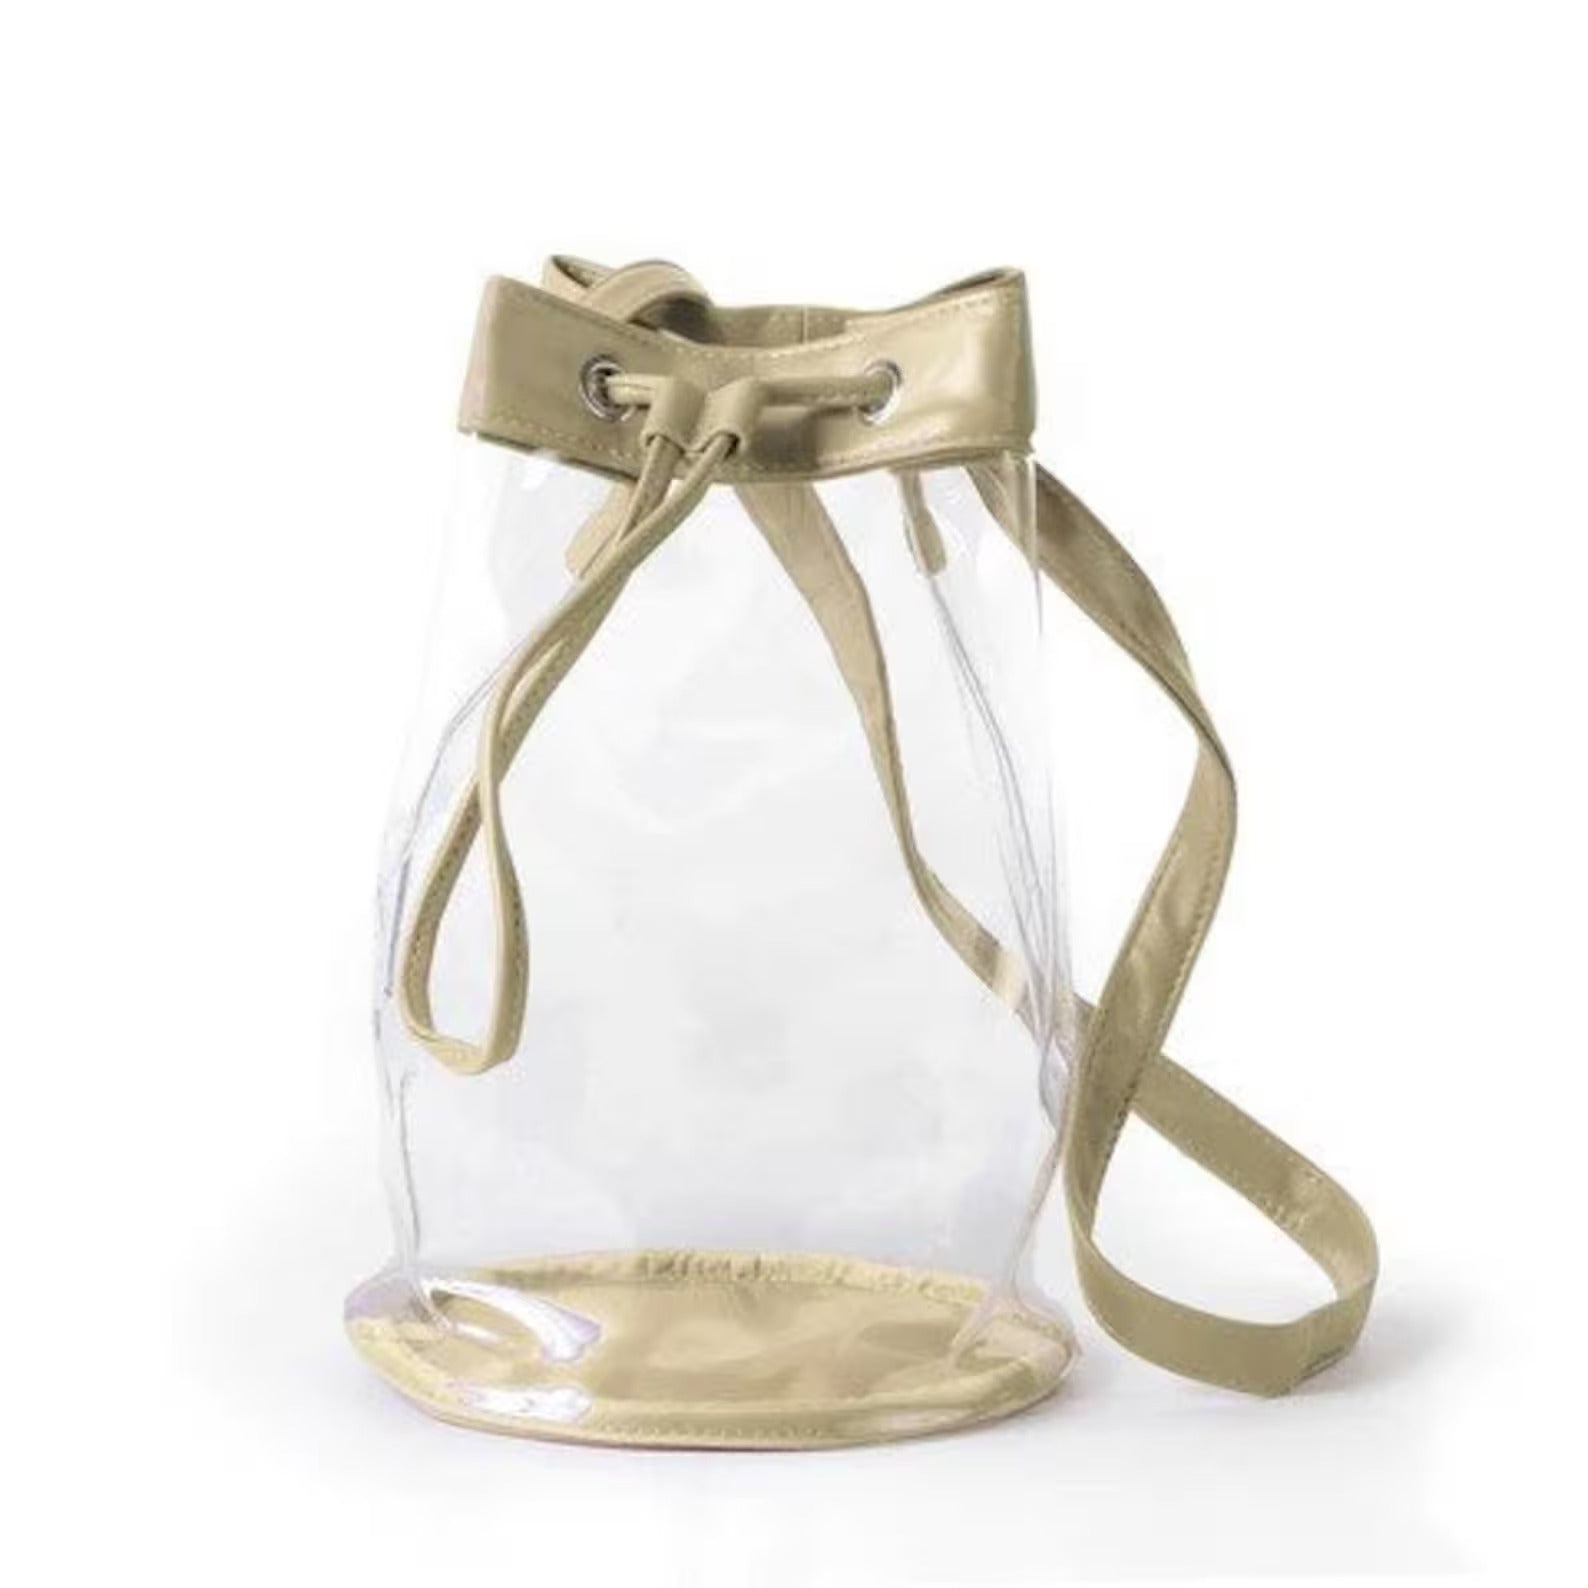 Stadium Approved Clear Bucket Bag - Gold Trim